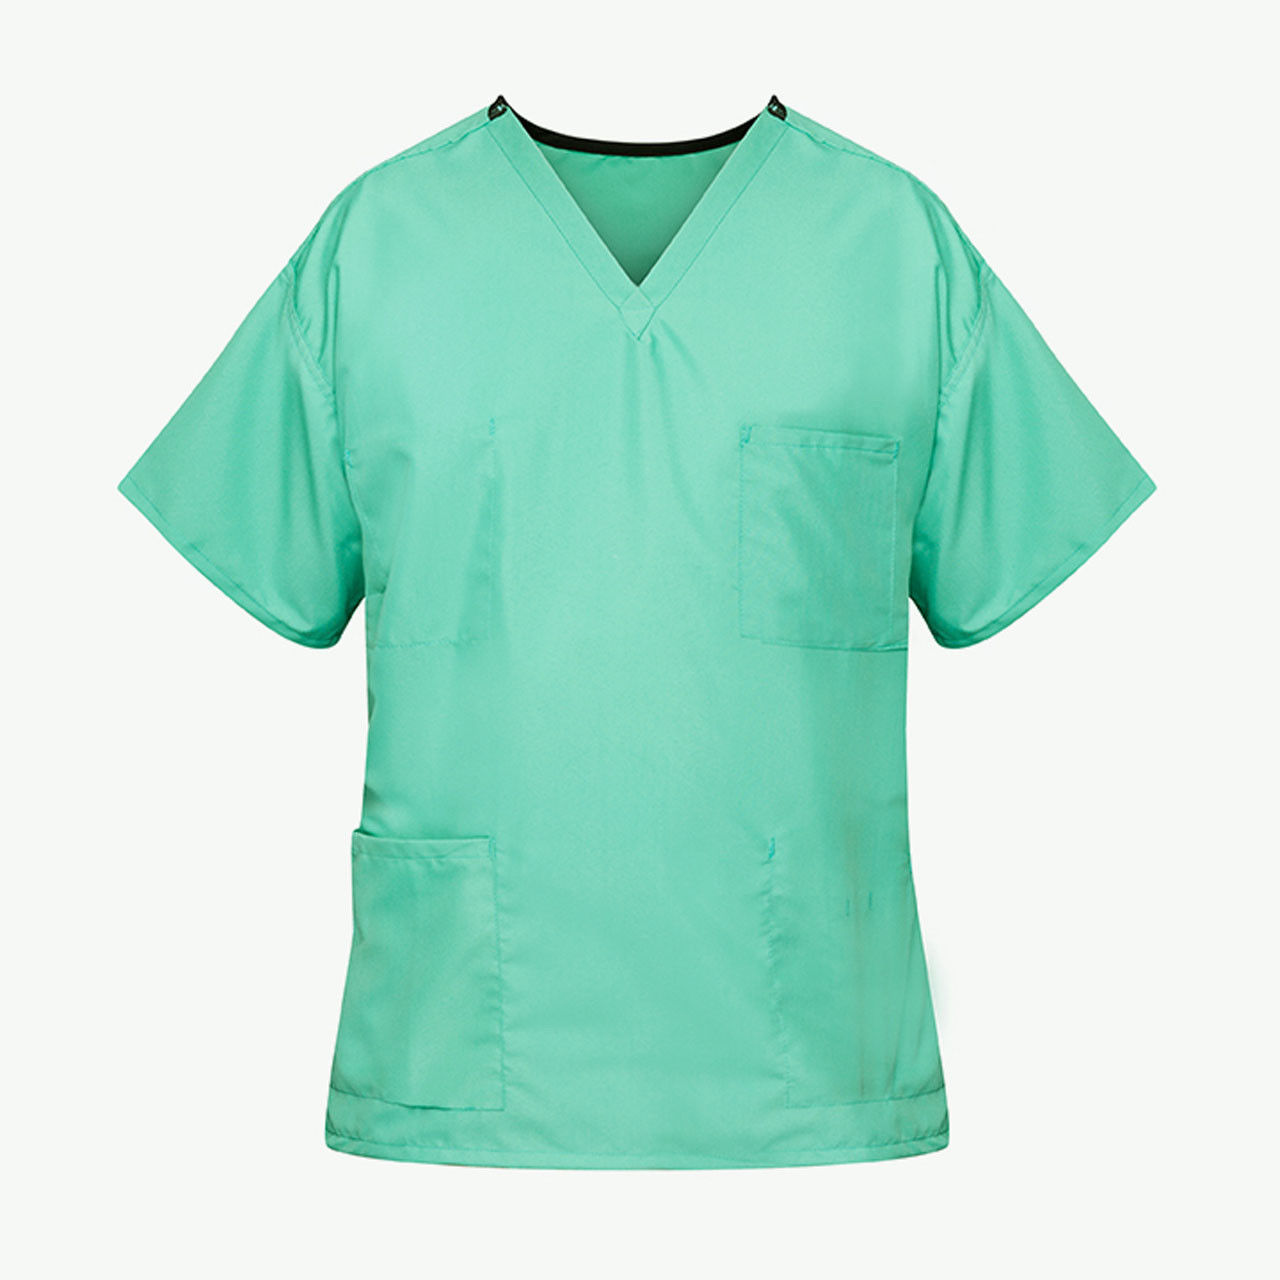 What's the best way to choose the right alpha-size for jade green scrubs?